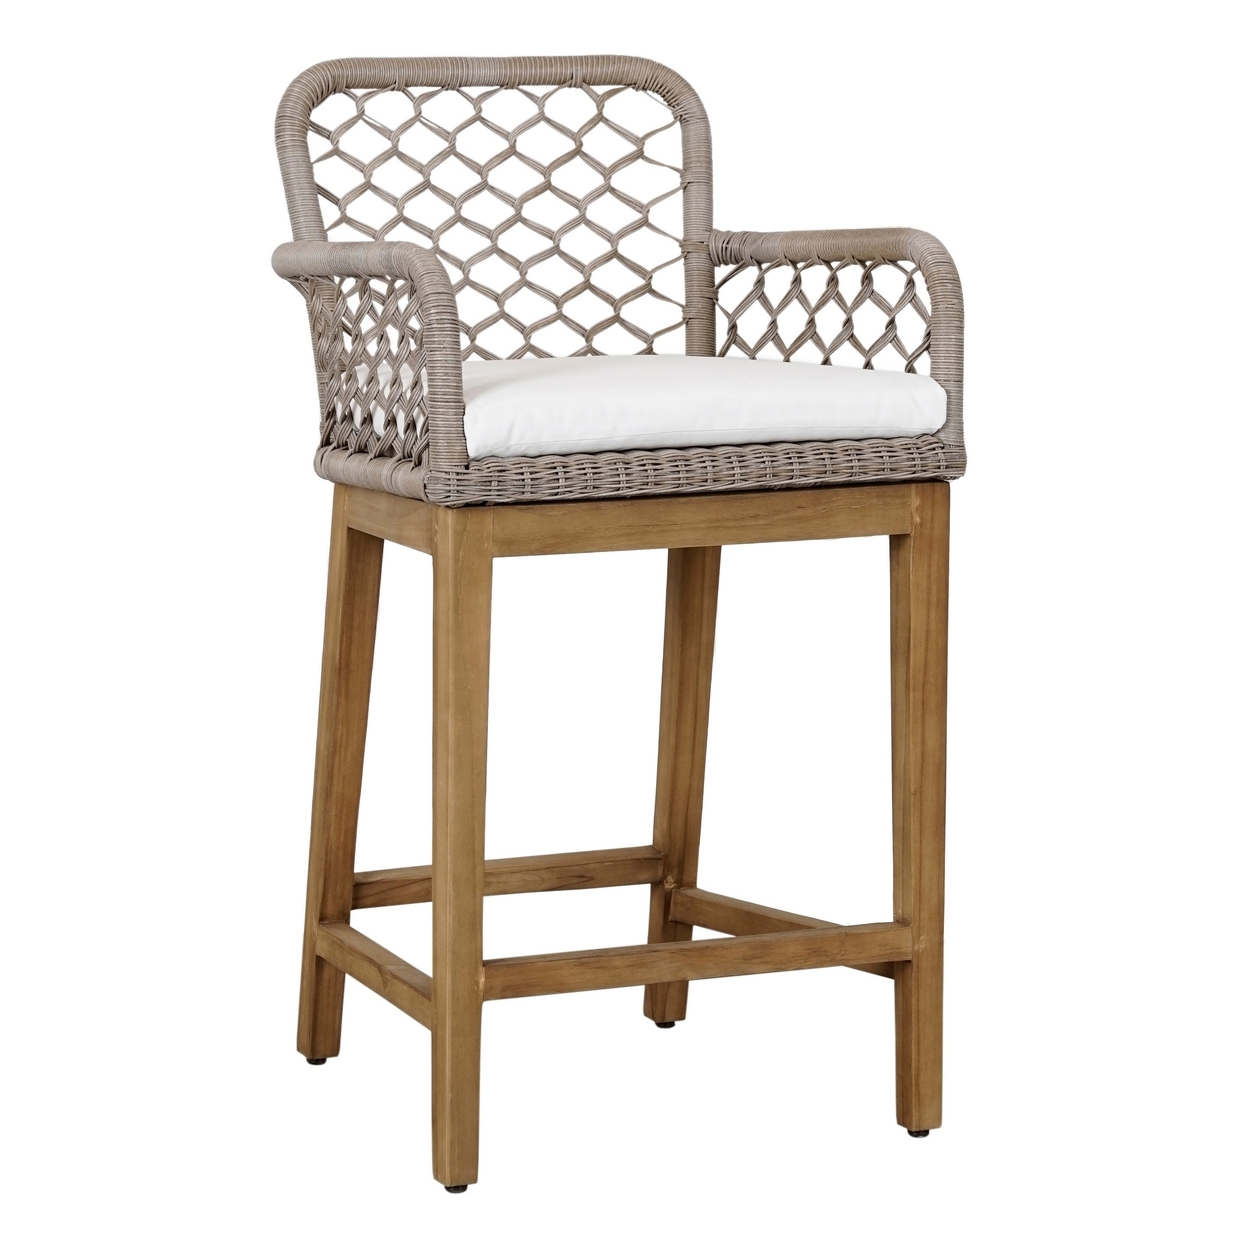 Aok 27 Inch Outdoor Counter Stool Chair, Gray Woven Rope, Curved, Brown Teak -Saltoro Sherpi